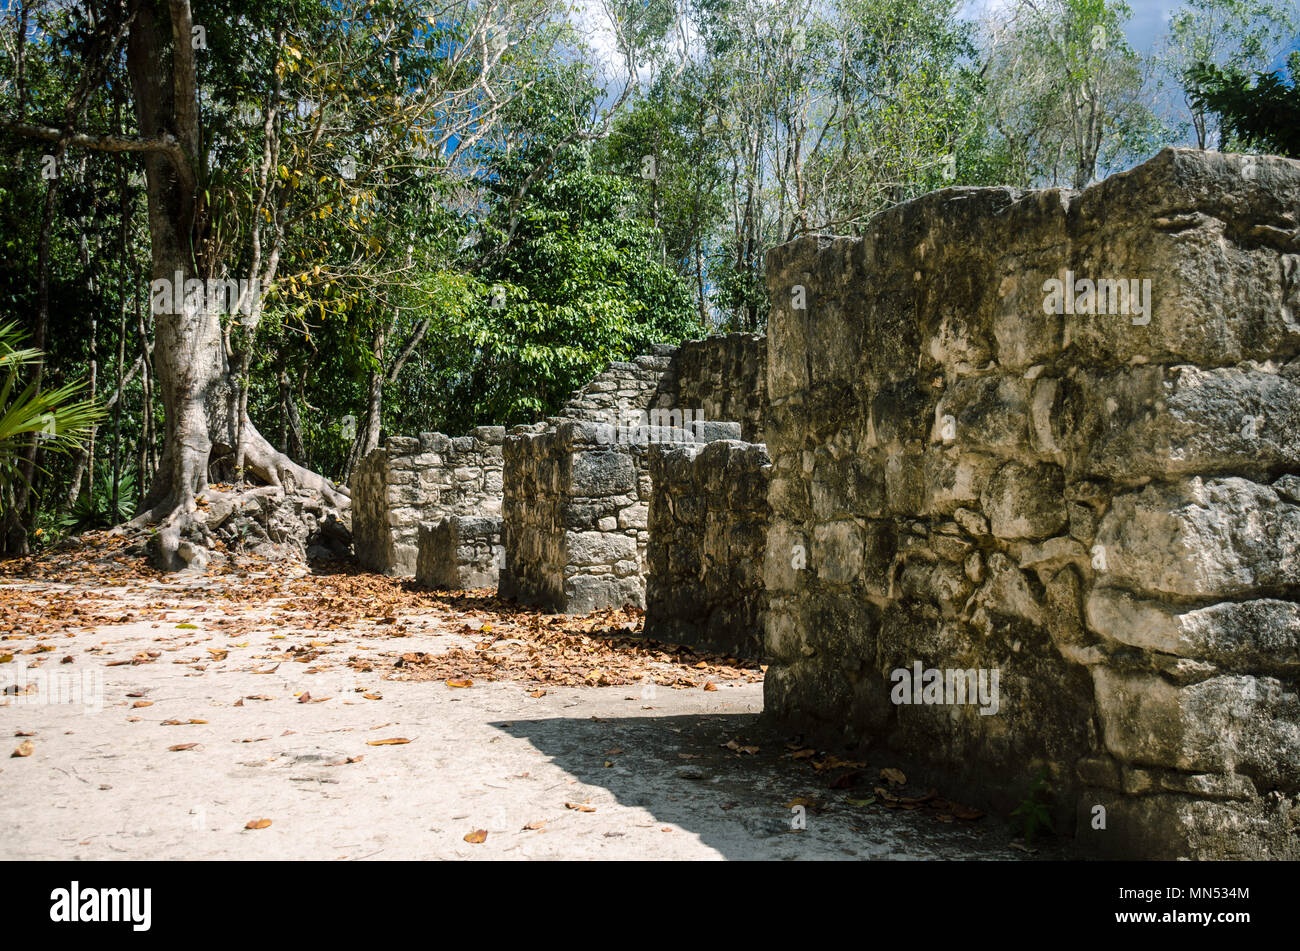 Ancient structures of the ancient mayas in Coba, Mexico Stock Photo